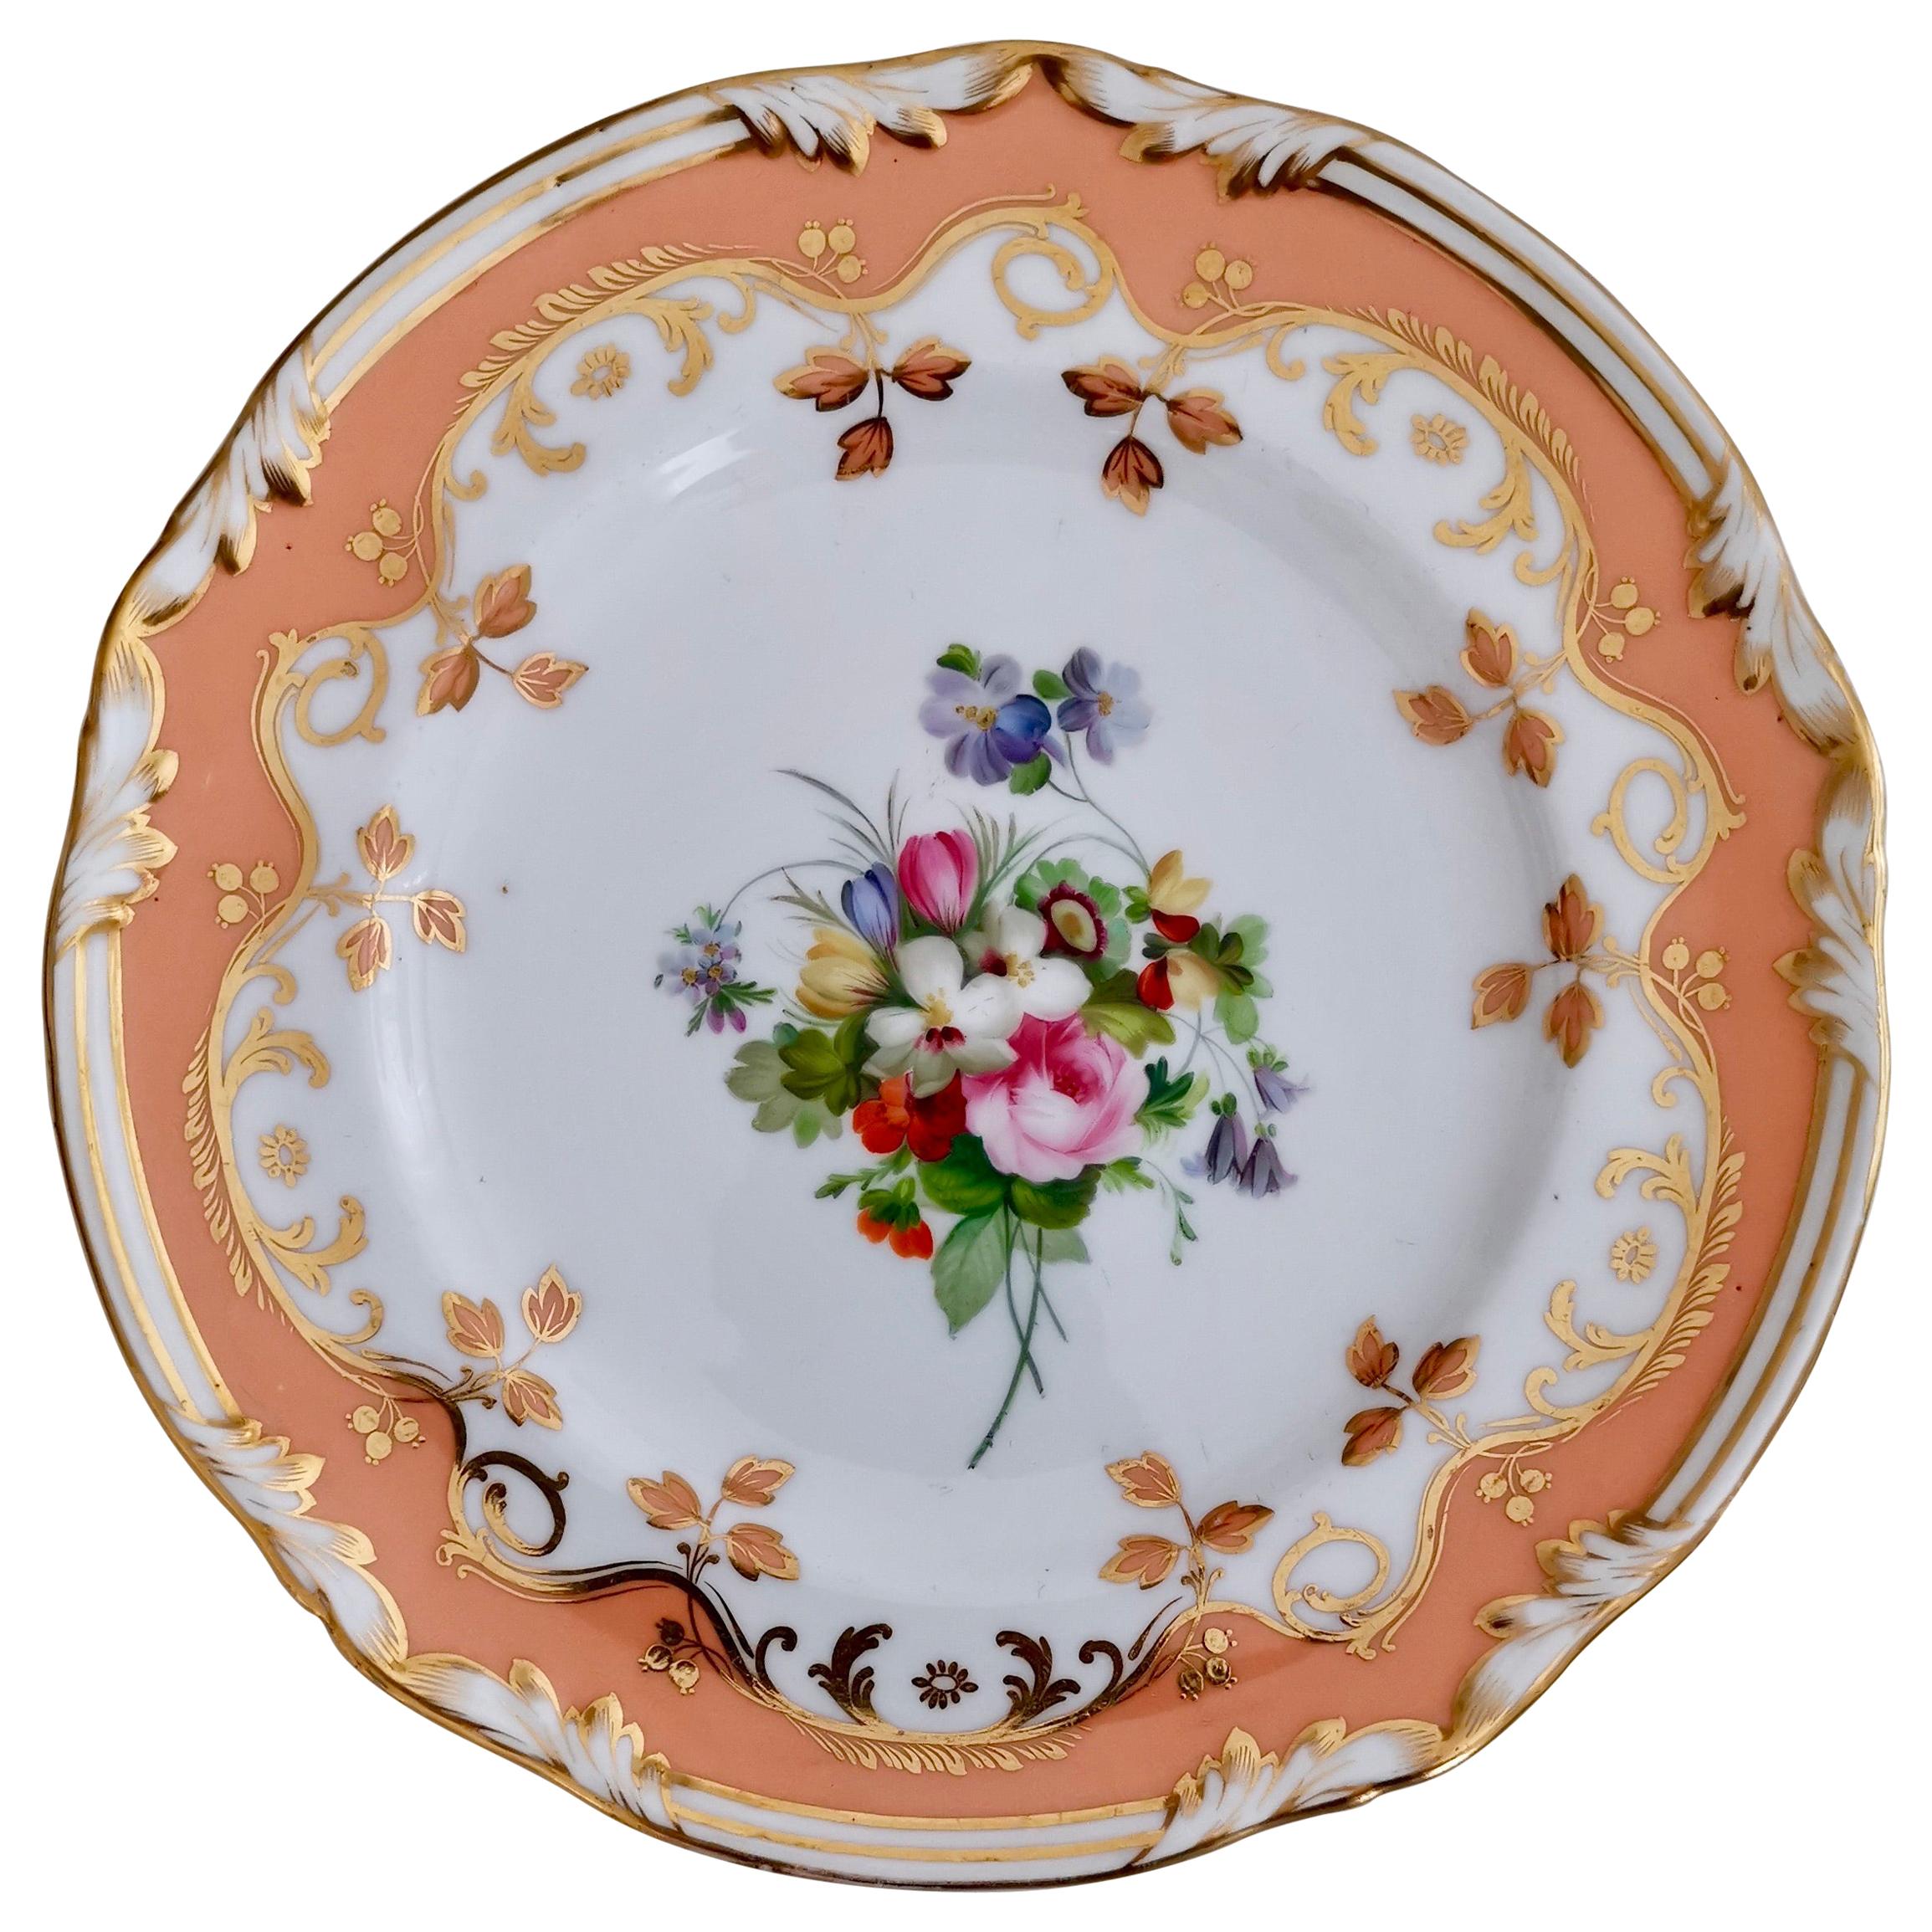 Coalport Porcelain Plate, Peach Ground and Flowers by Thomas Dixon